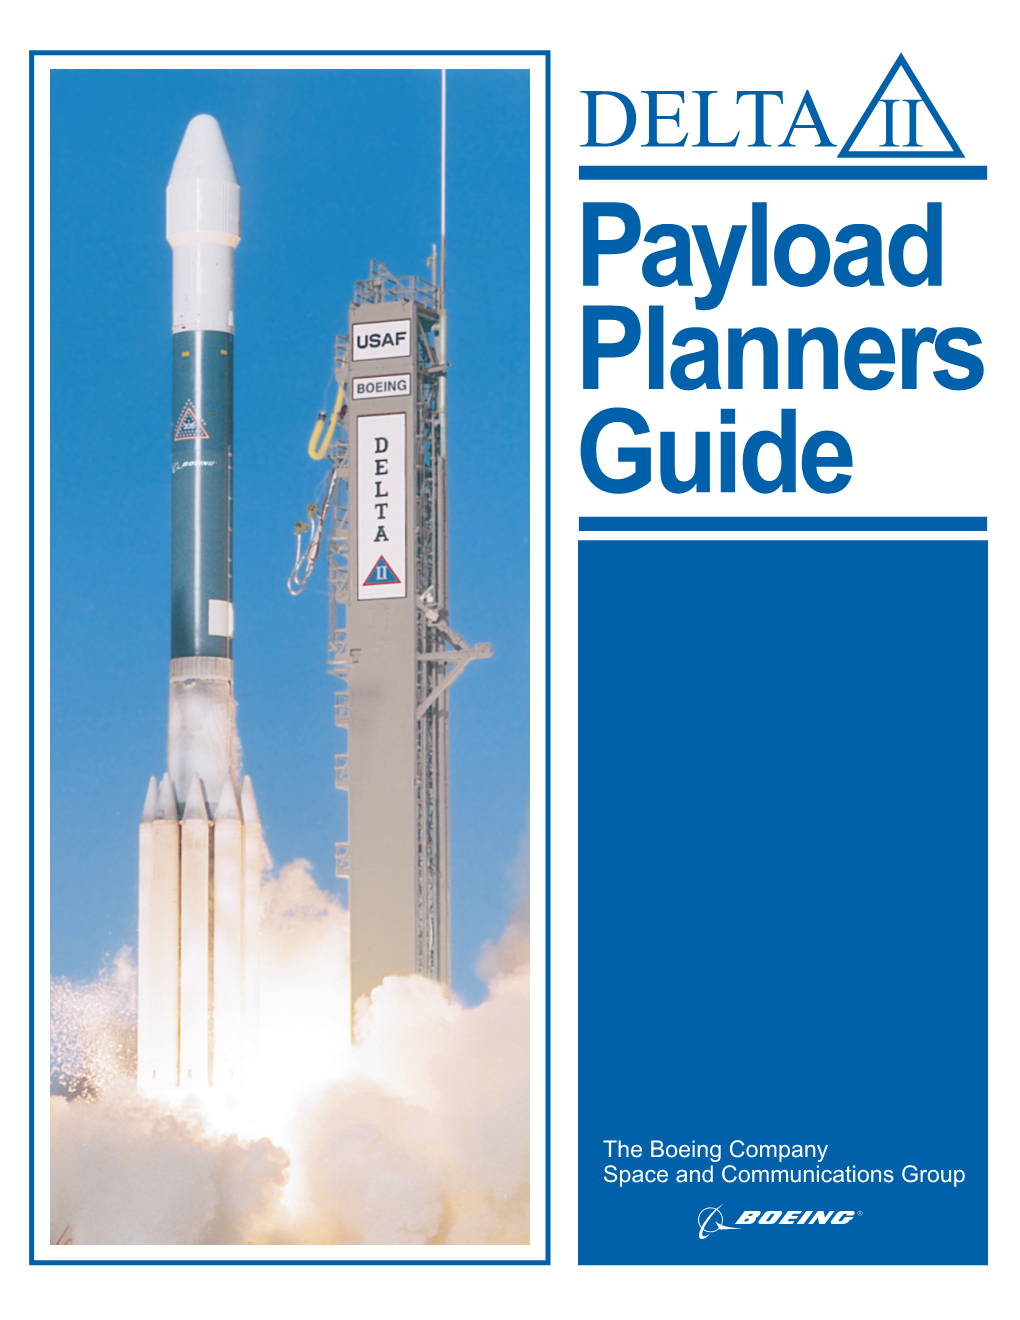 DELTA II Payload Planners Guide